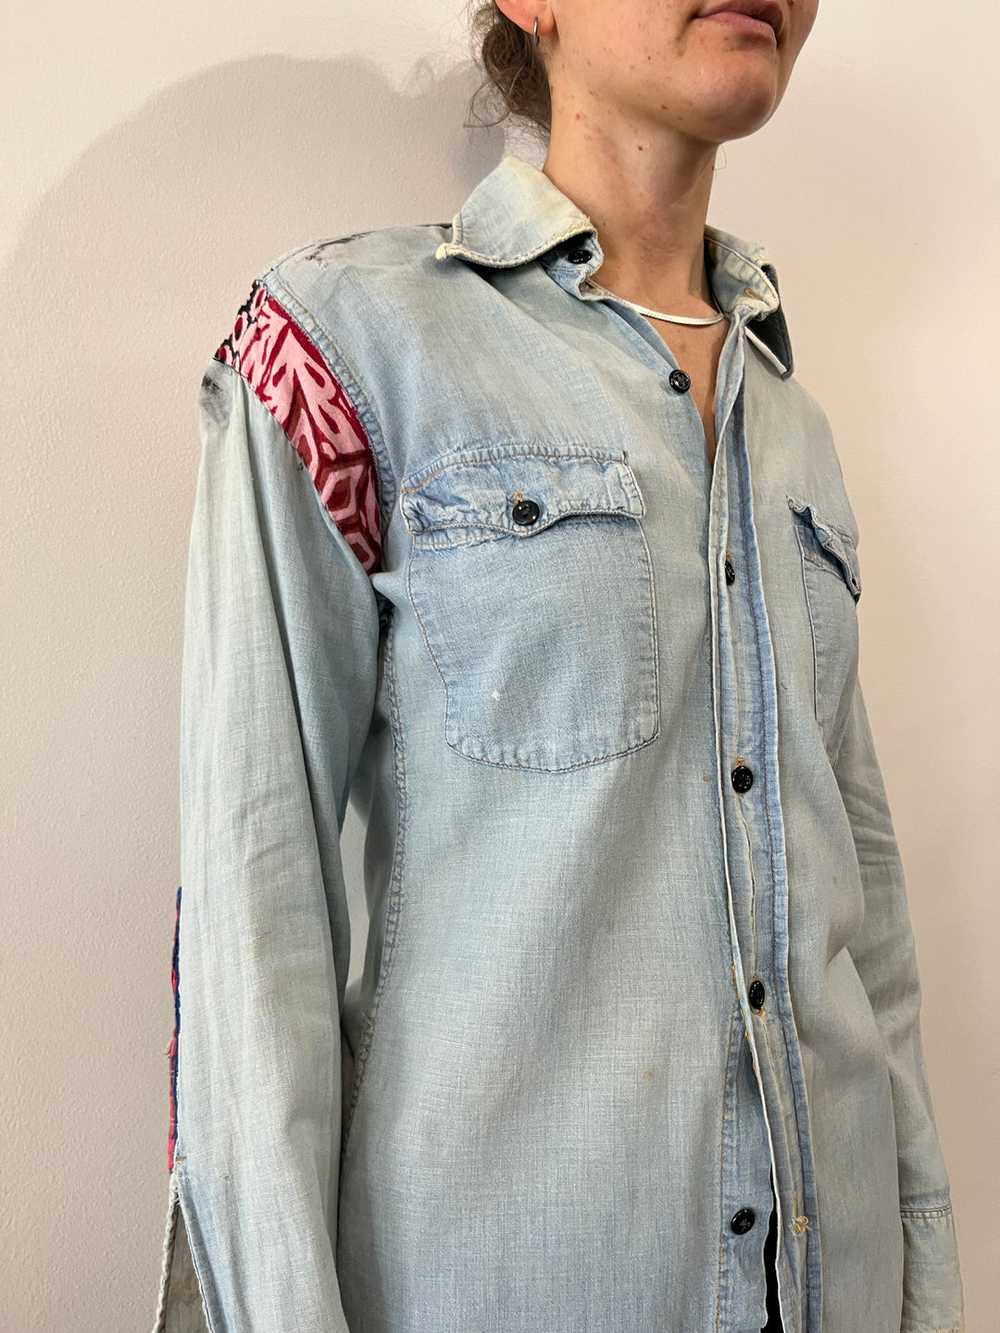 70s Patchwork Levis Chambray Shirt - image 3